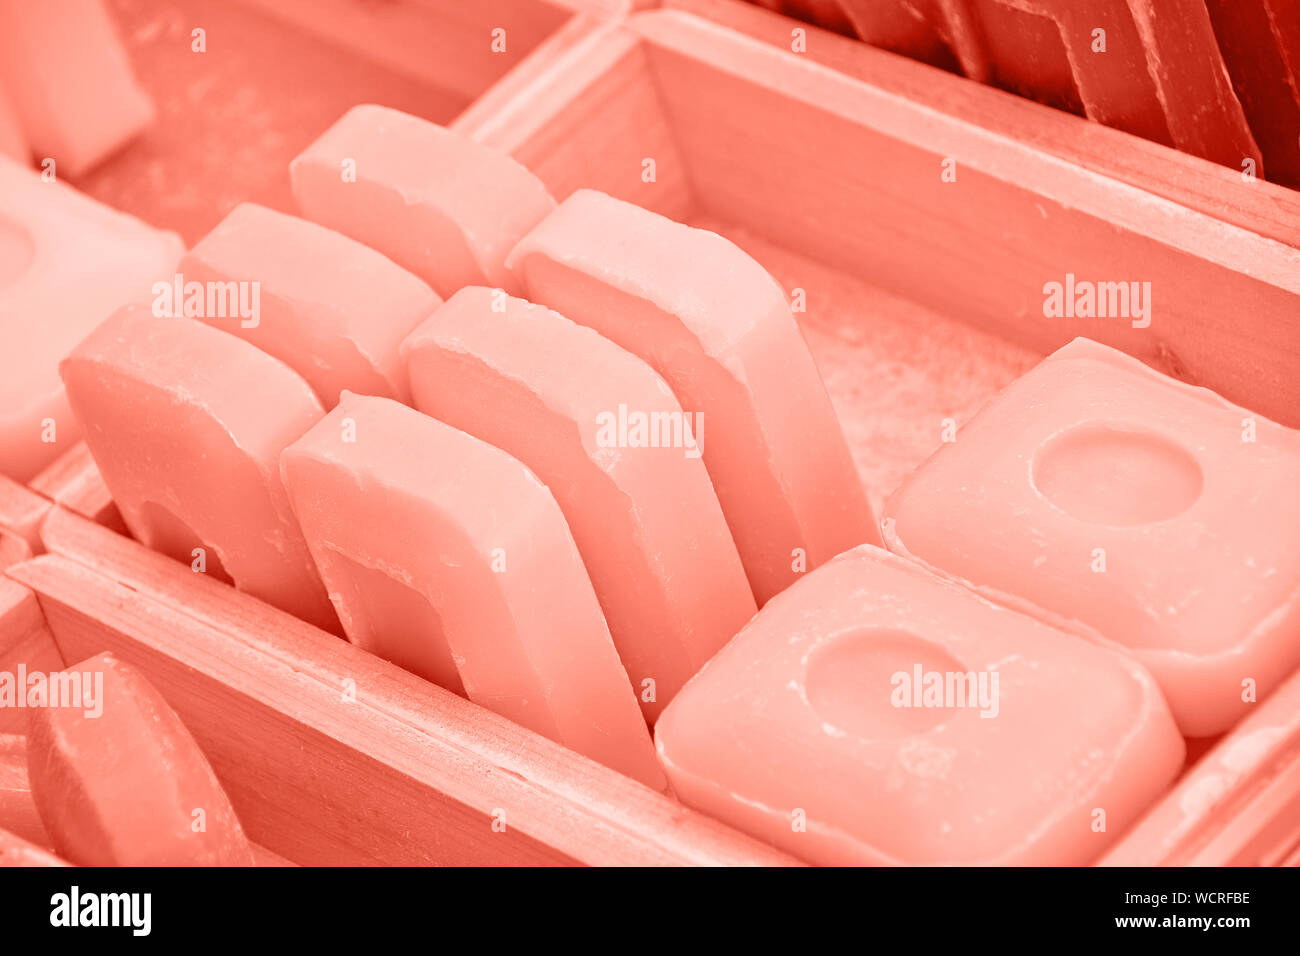 Close up coral pink toned traditional beauty toilet hard soap bars in wooden box on retail display, high angle view Stock Photo